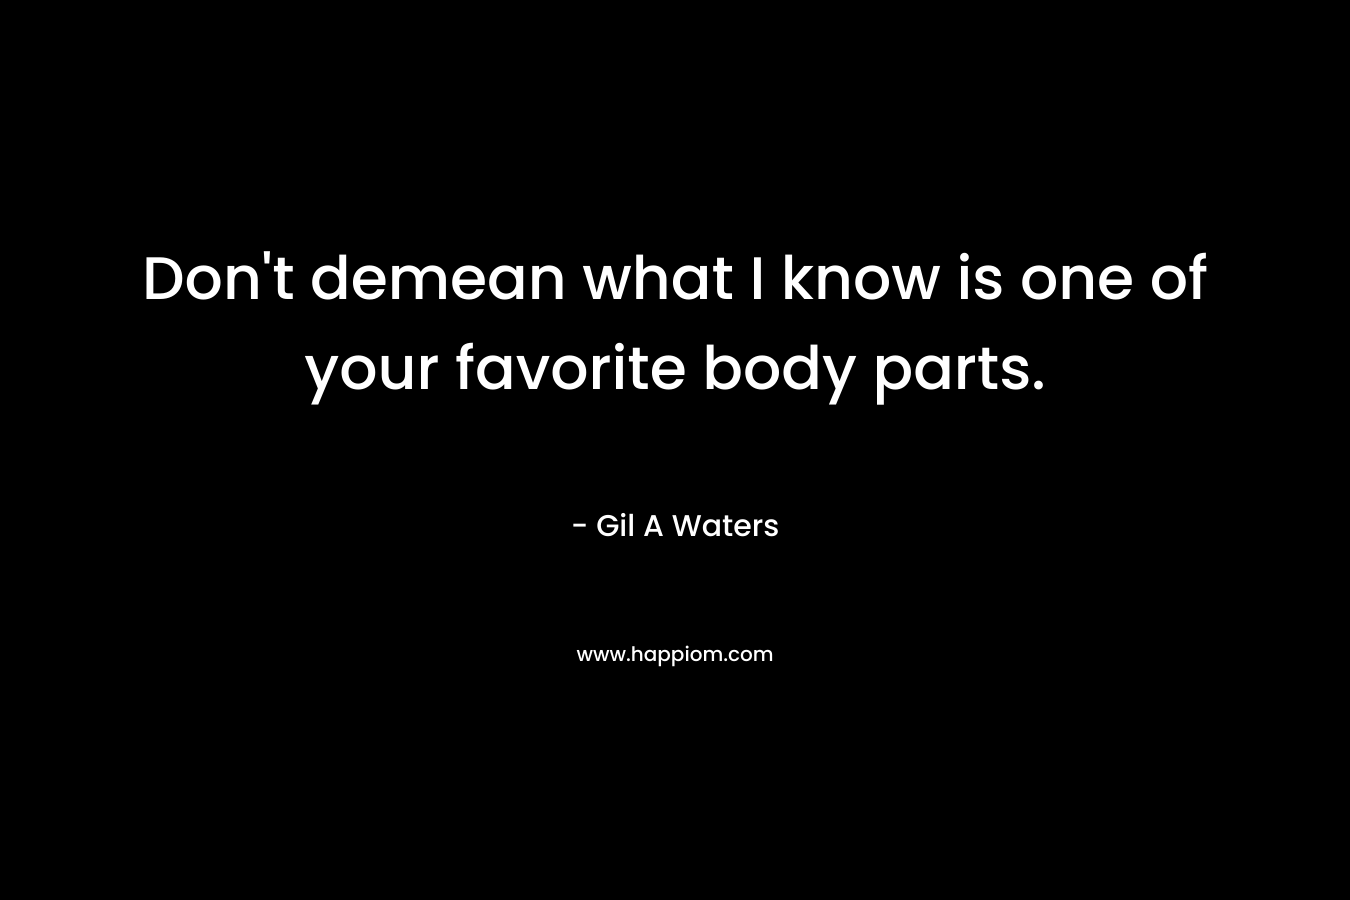 Don't demean what I know is one of your favorite body parts.